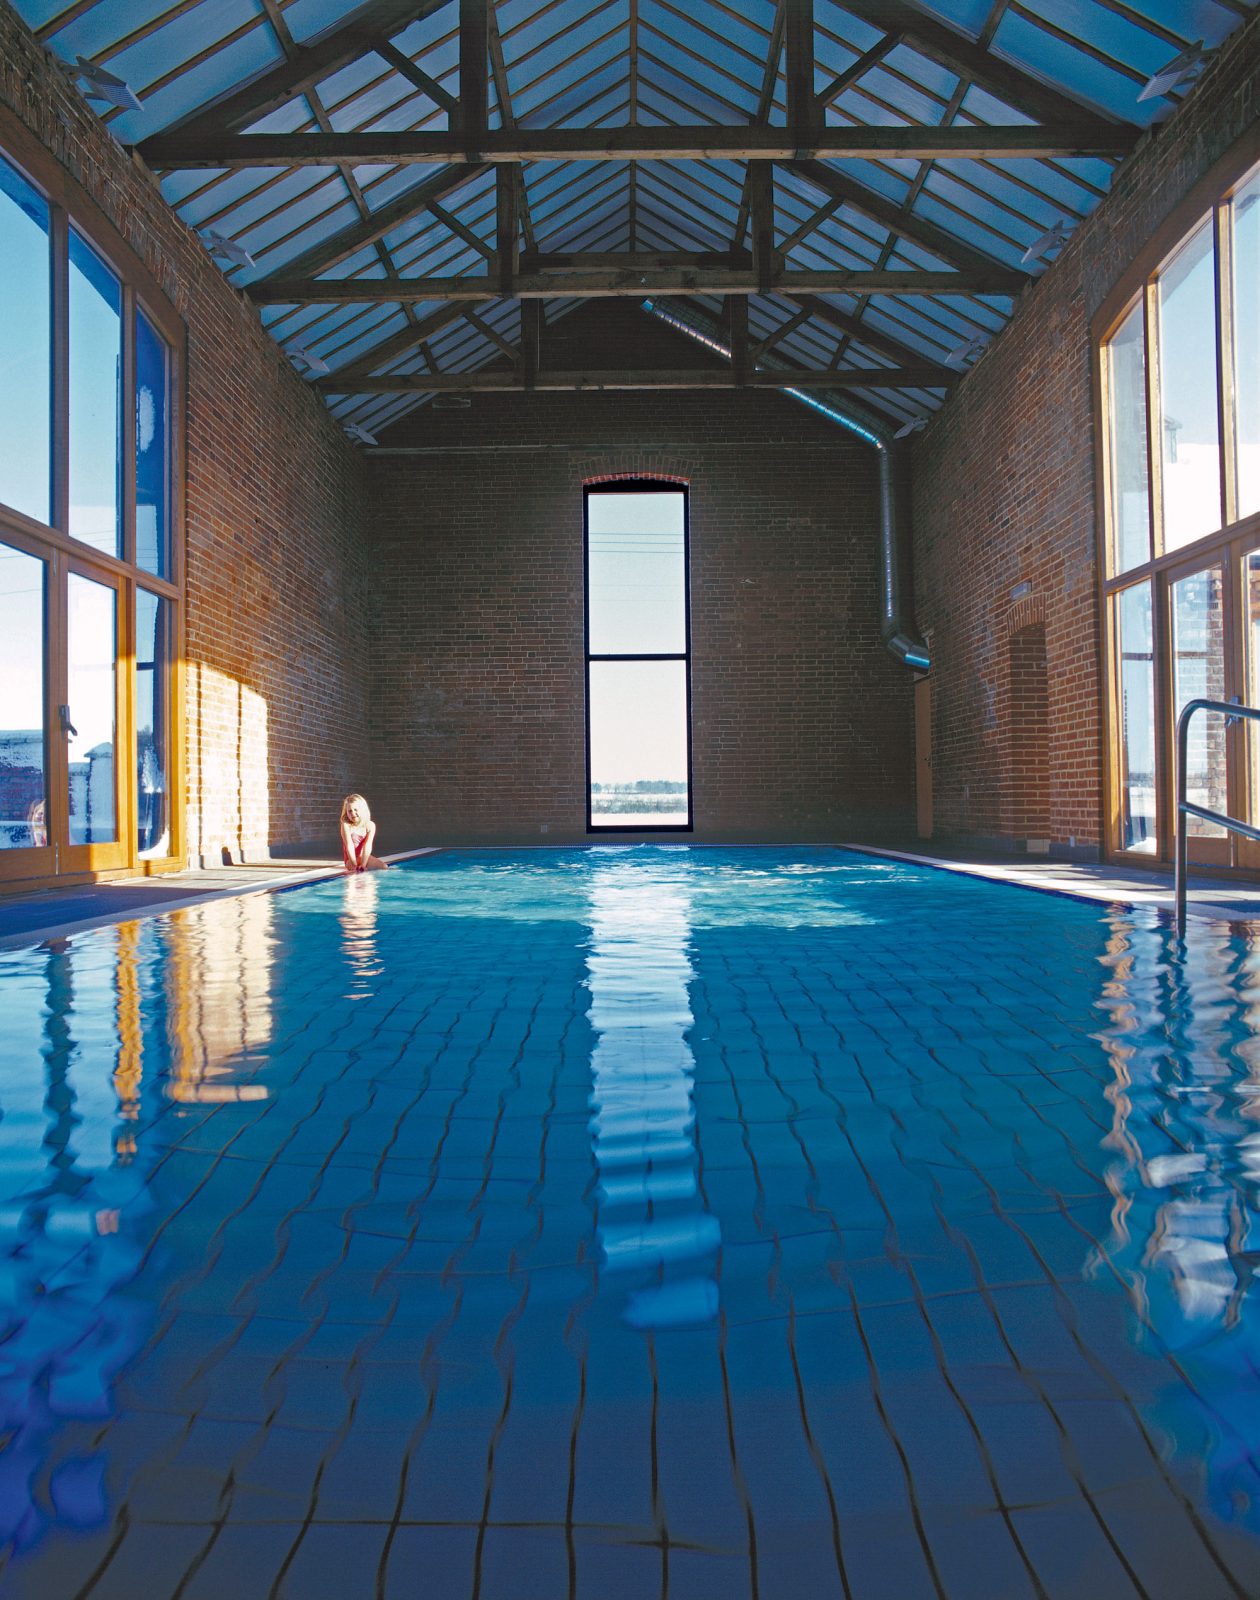 Self Catering Luxury Holiday Cottages With Heated Indoor Swimming Pool